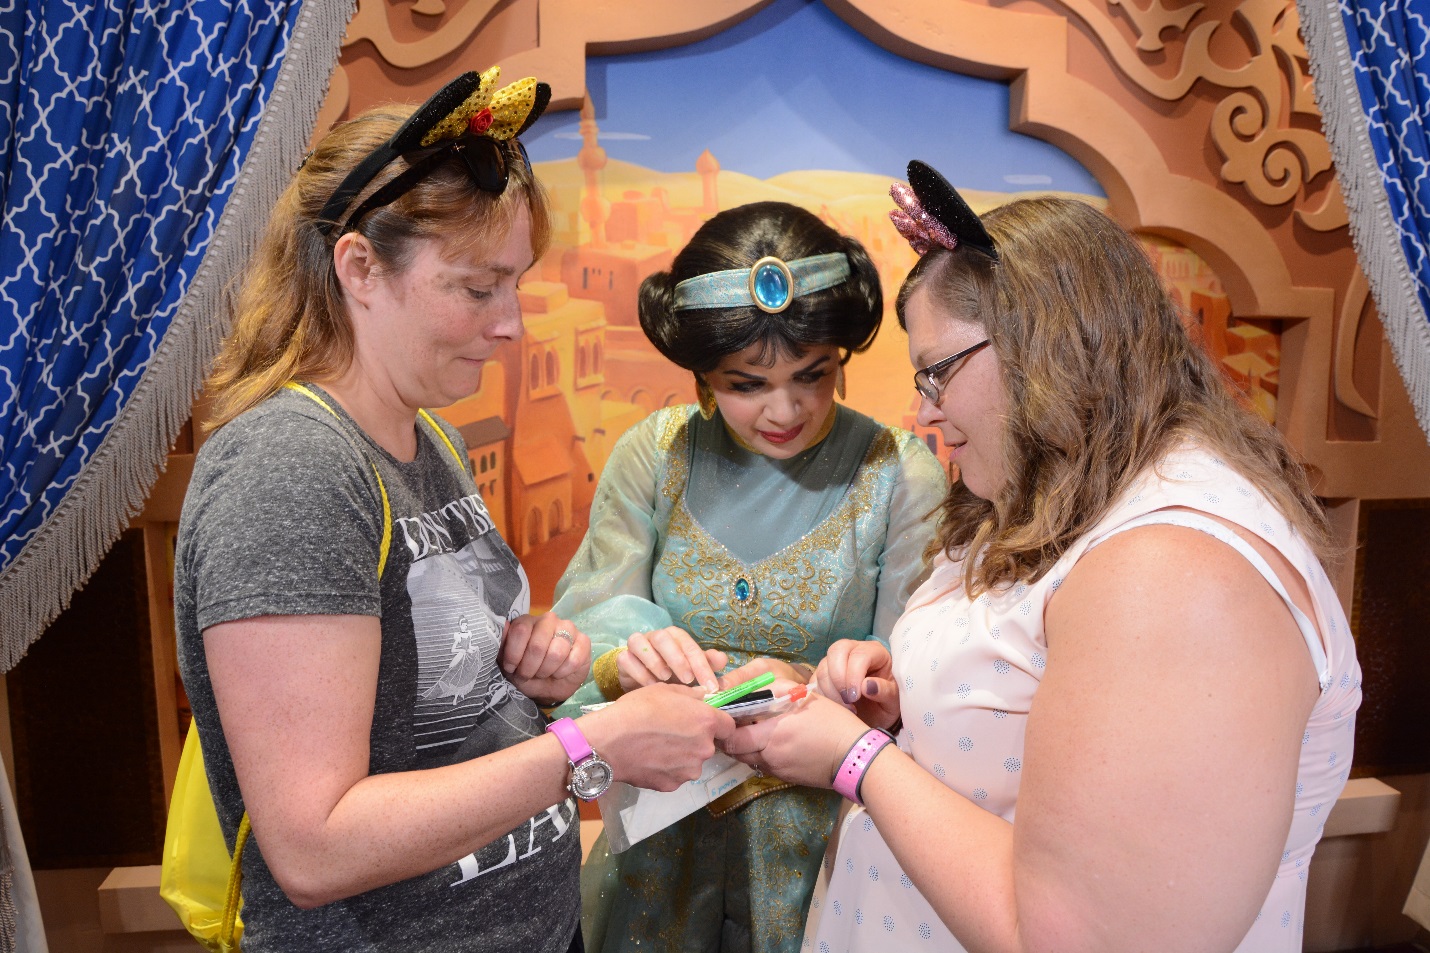 a woman, a young woman, and a woman dressed as Jasmine from Aladdin stand together while Jasmine signs the autograph book